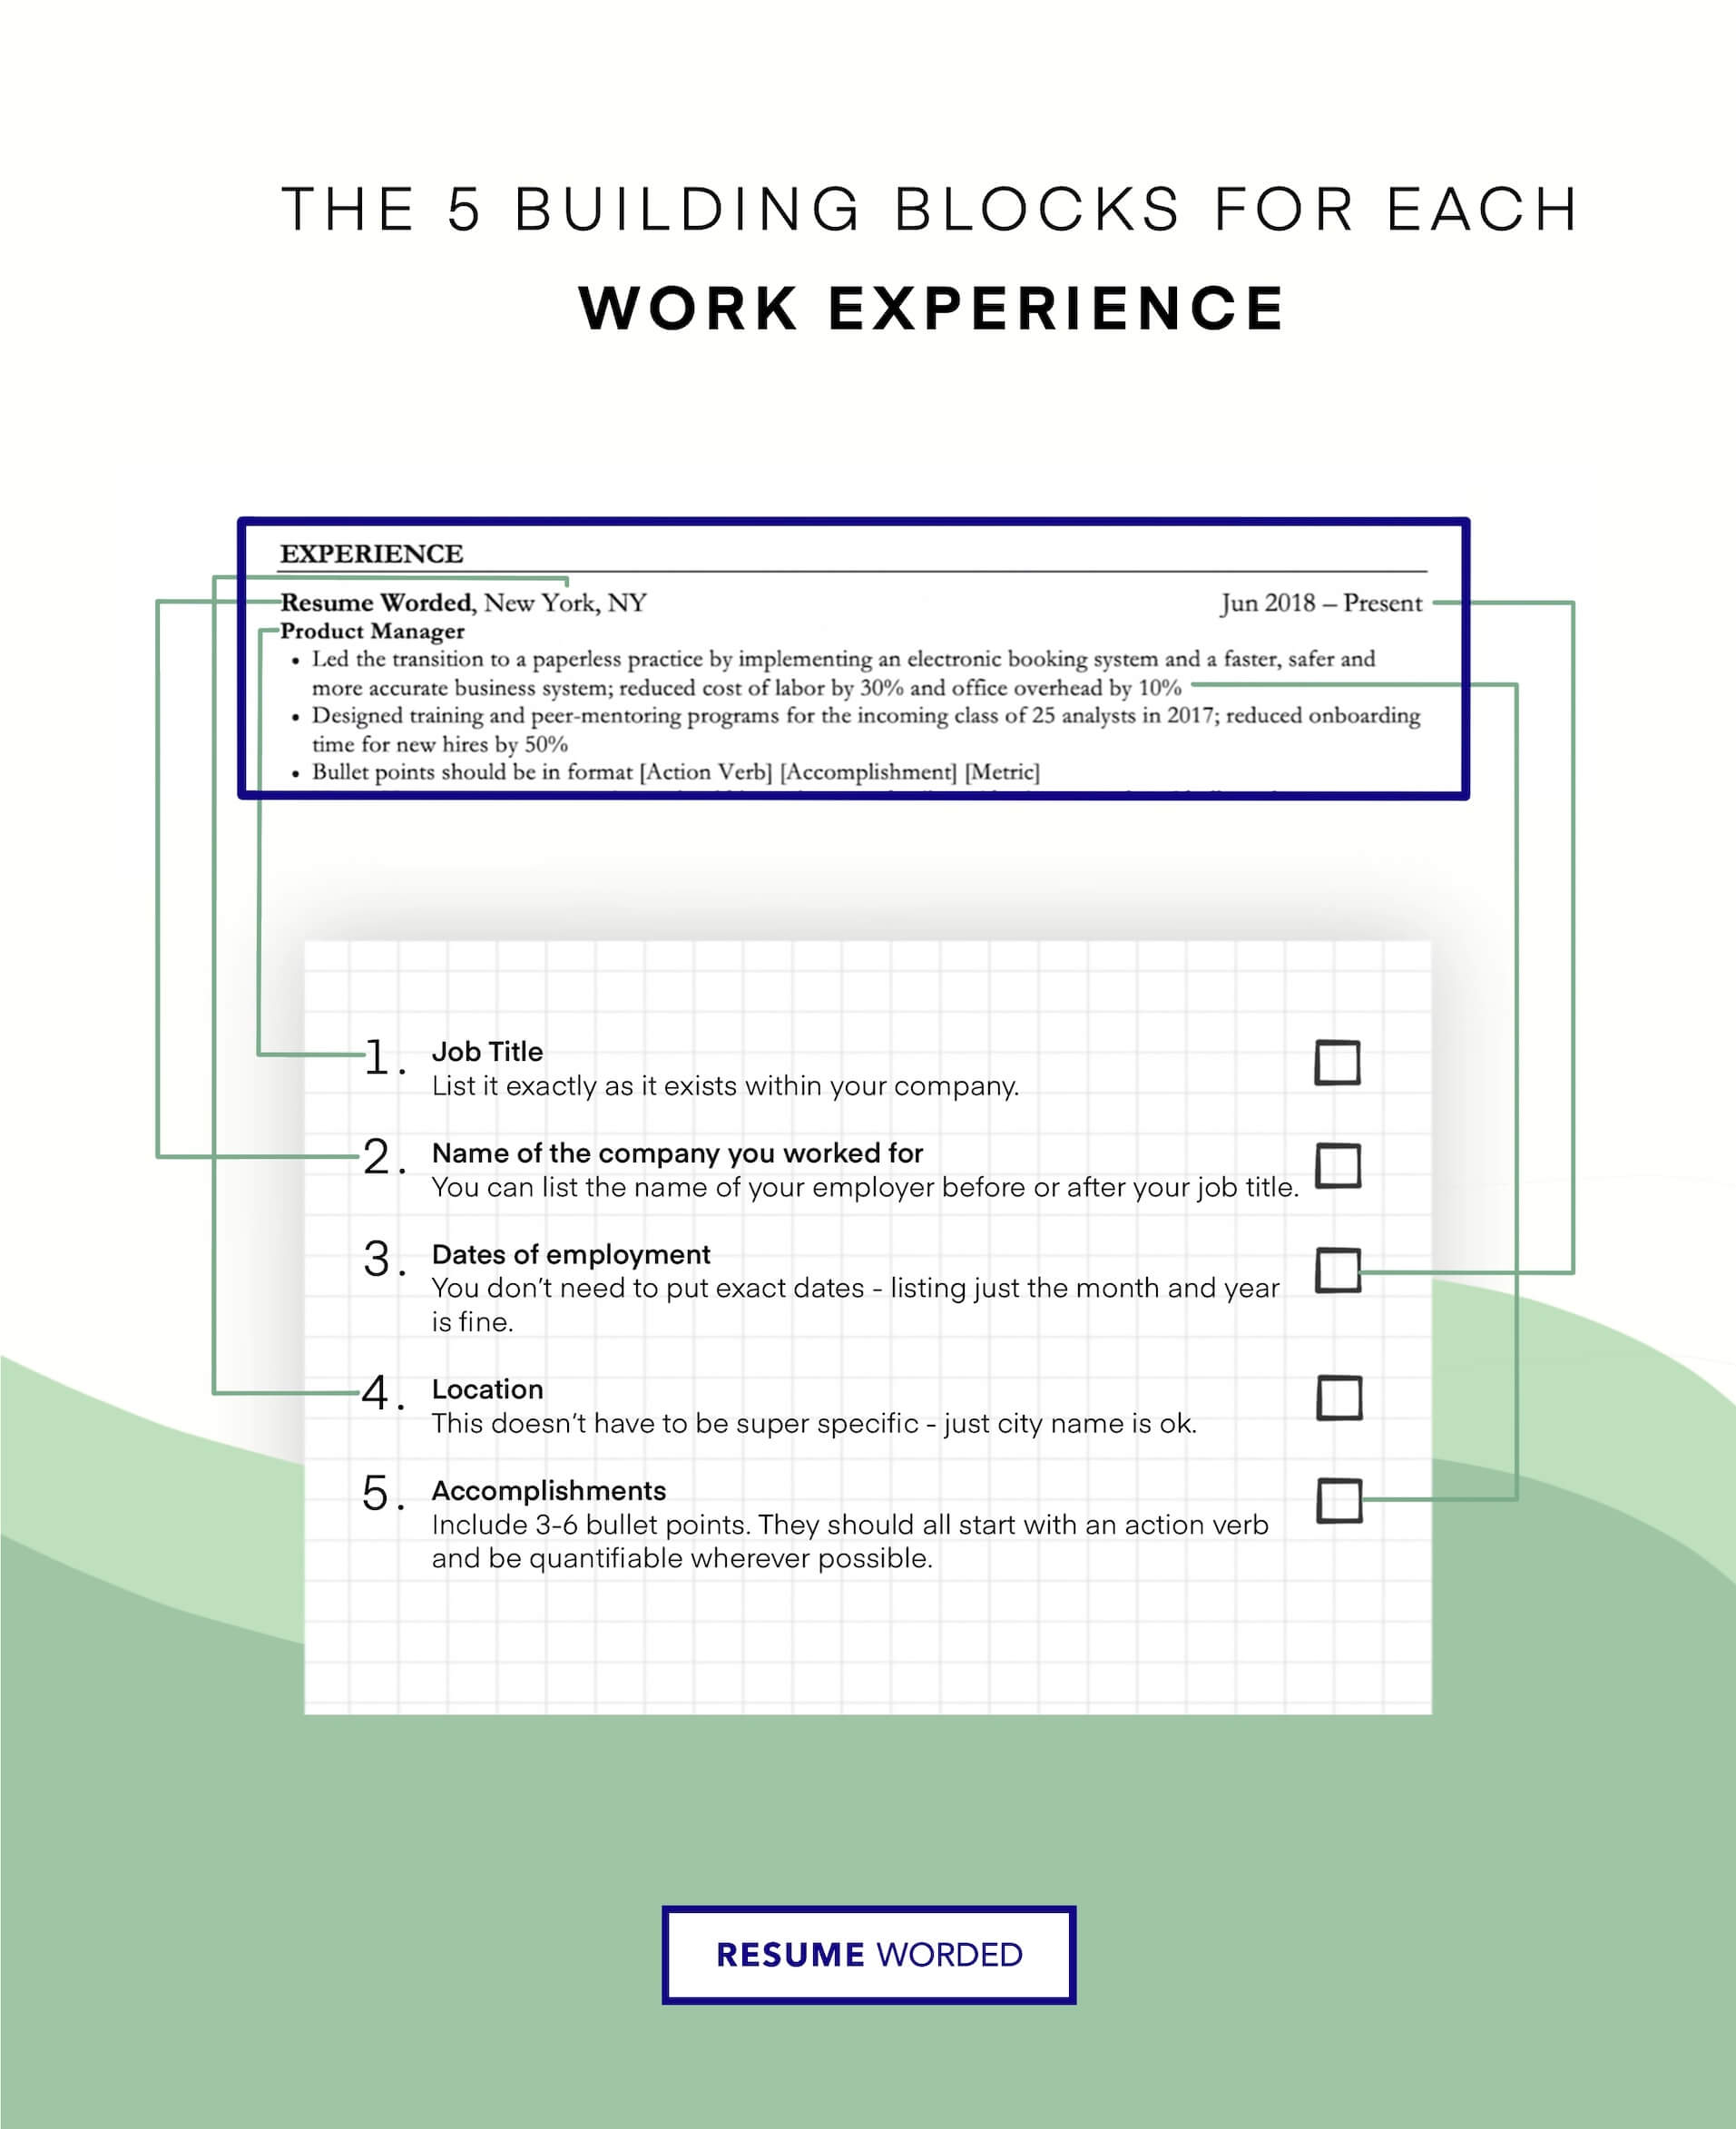 Detail your therapy successes in your work experience - Psychologist Resume